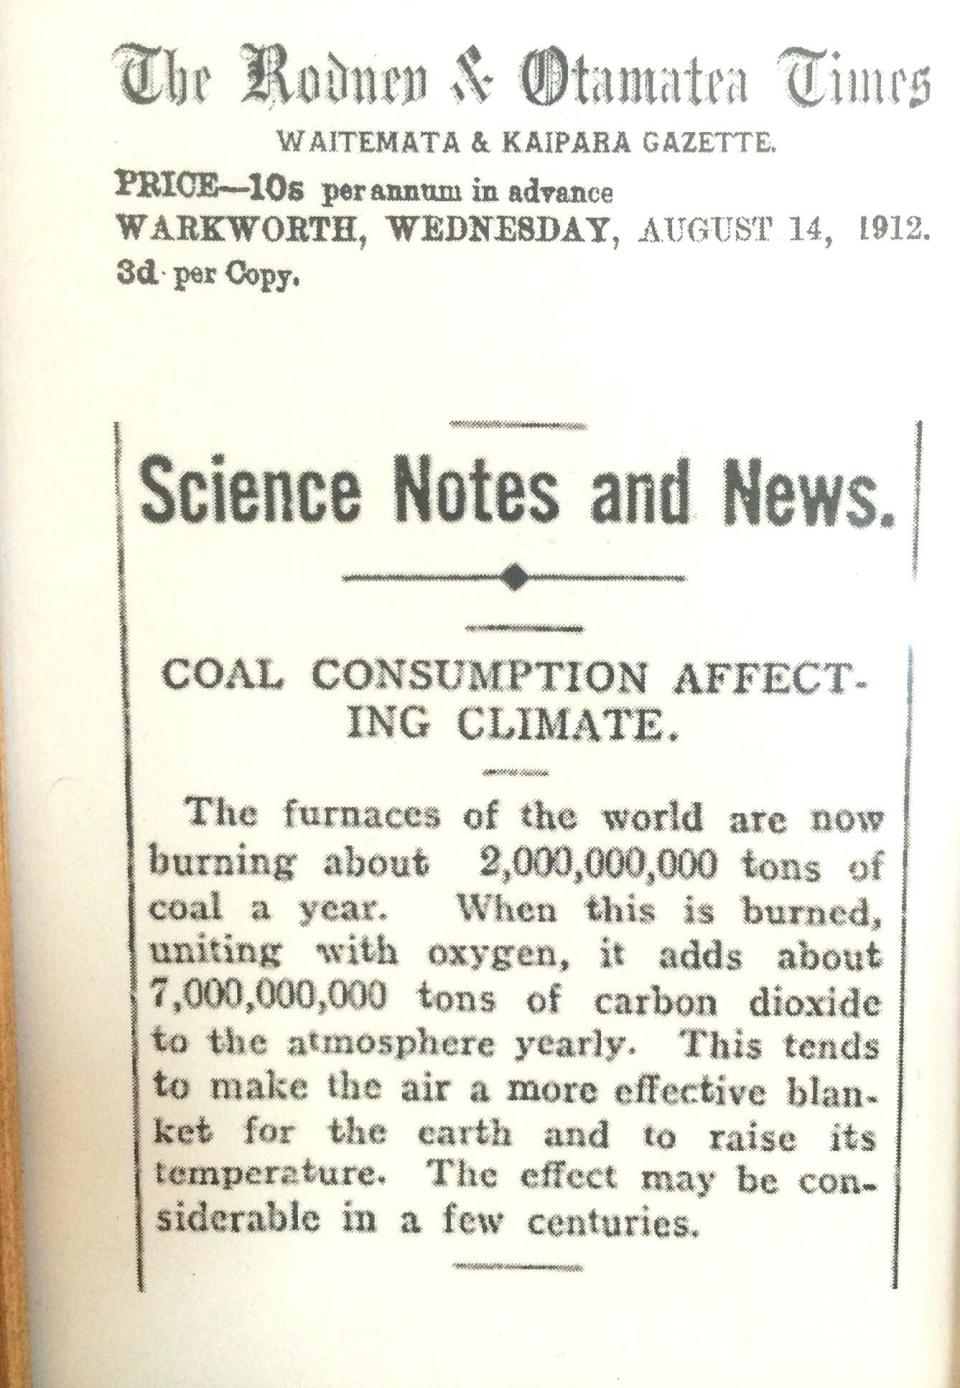 This item noting the greenhouse effect of climate change ran in The Rodney & Otamatea Times in New Zealand on Aug. 14, 1912.  It originated from a report in Popular Mechanics magazine earlier that year.